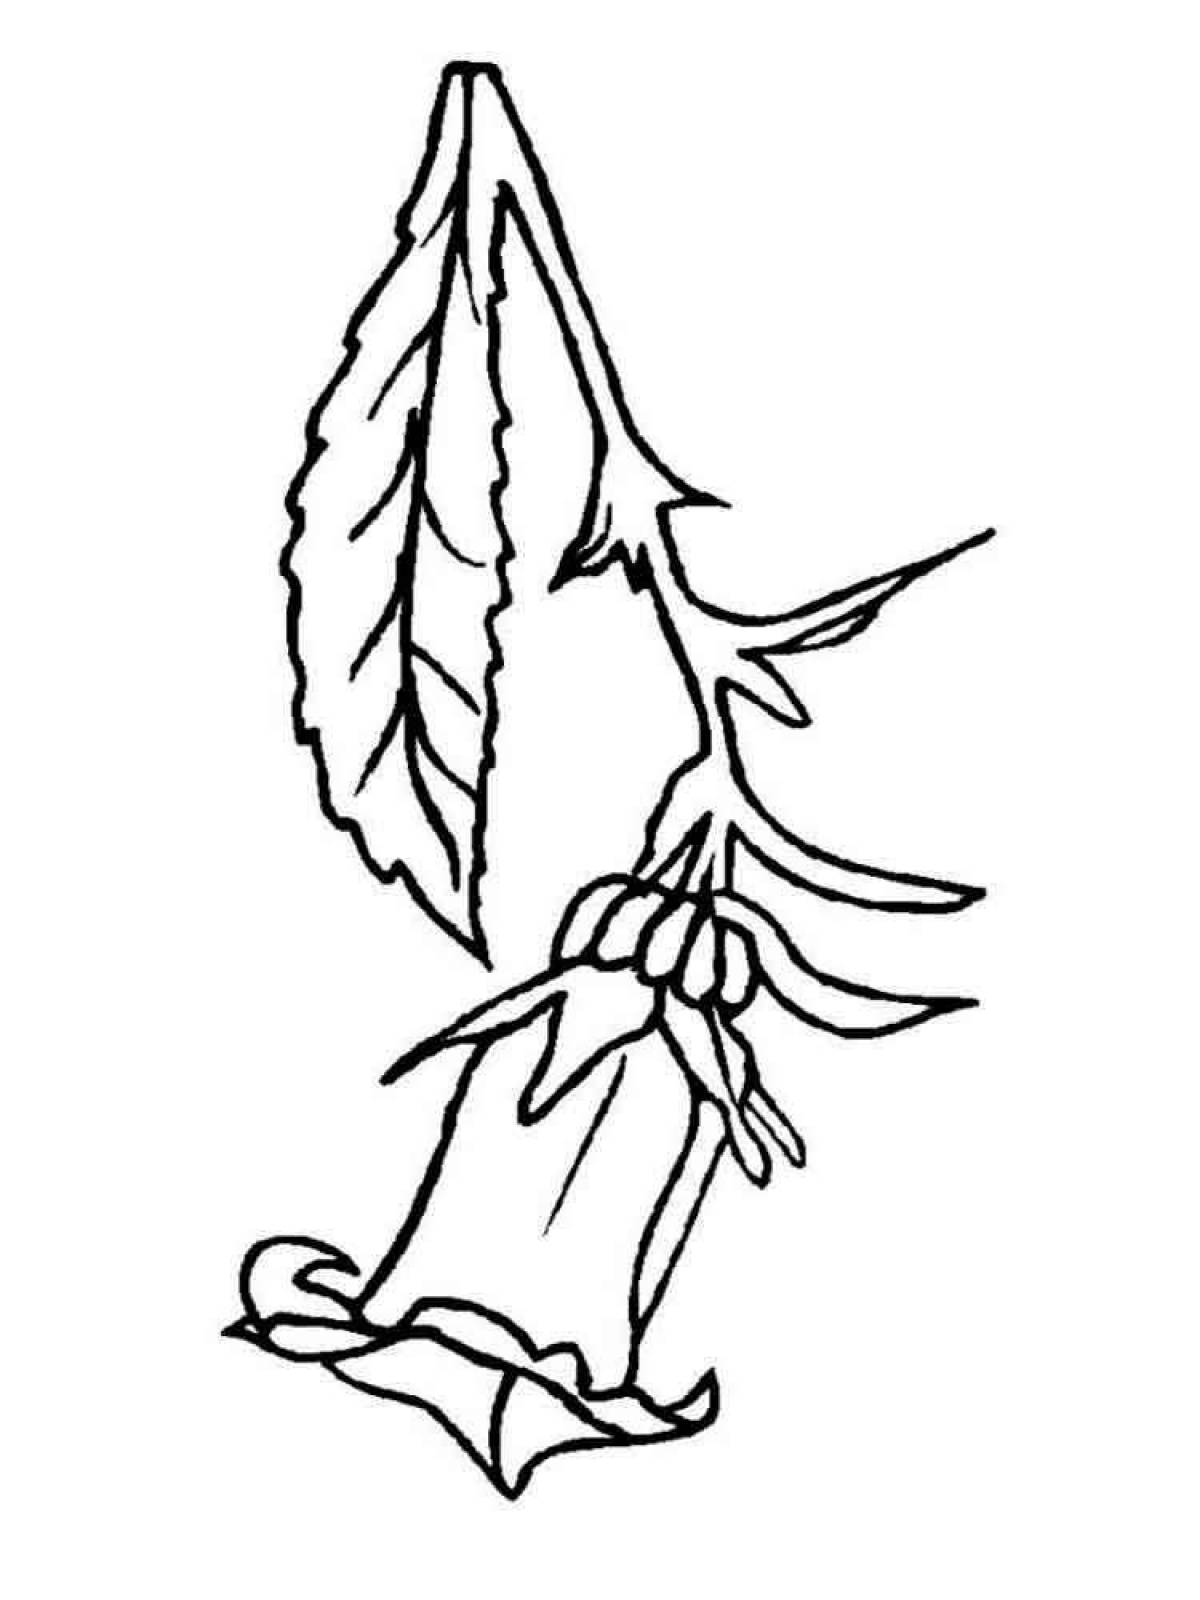 Coloring page playful flower bell